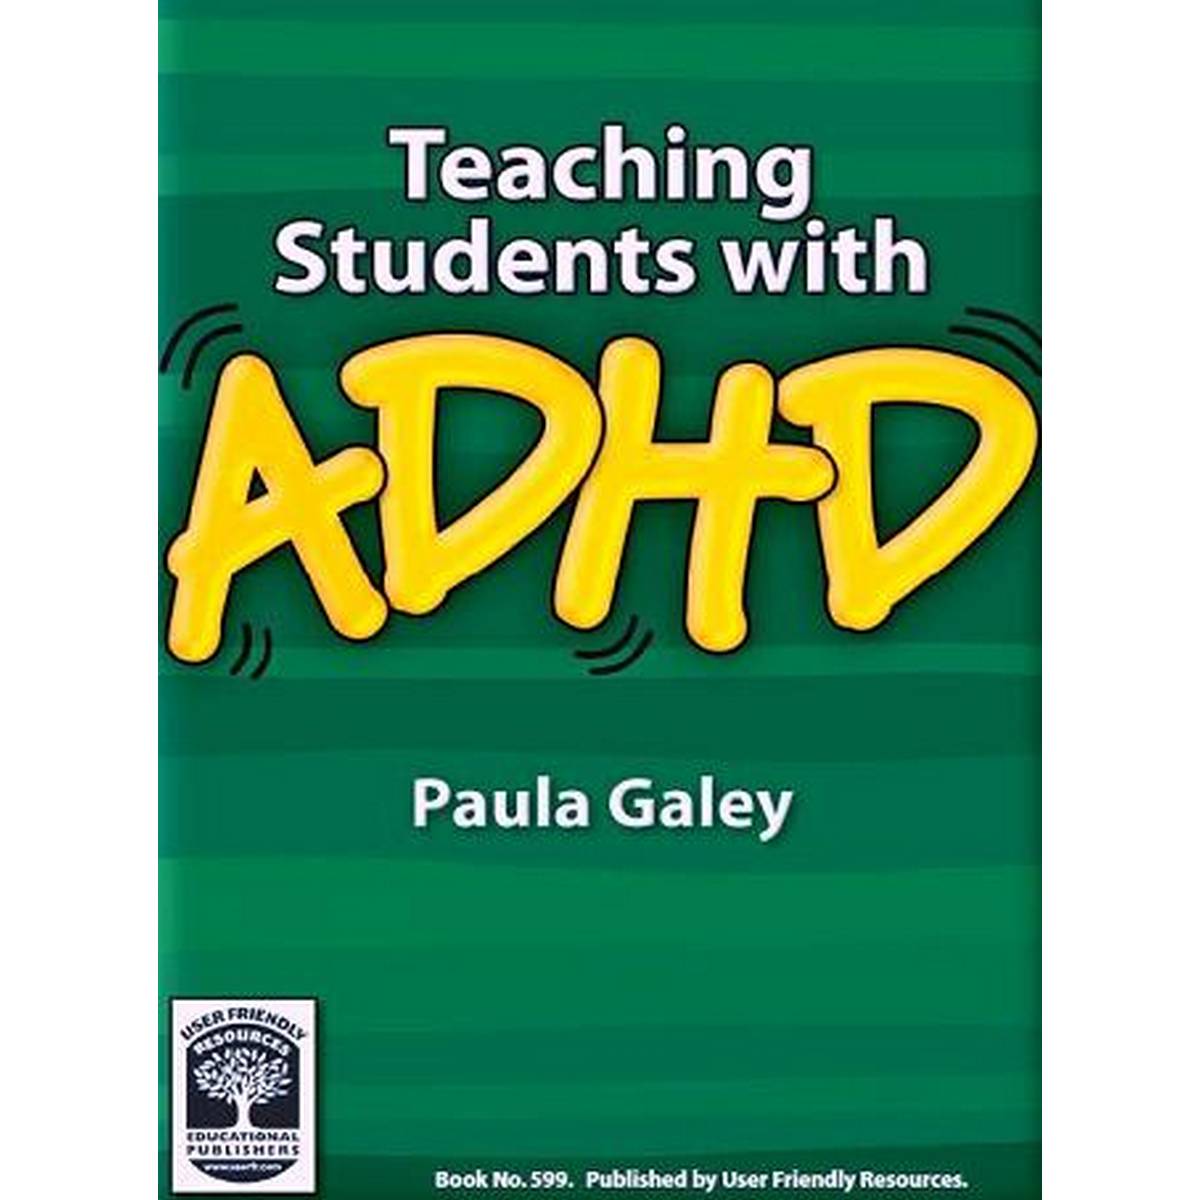 Teaching Students With ADHD